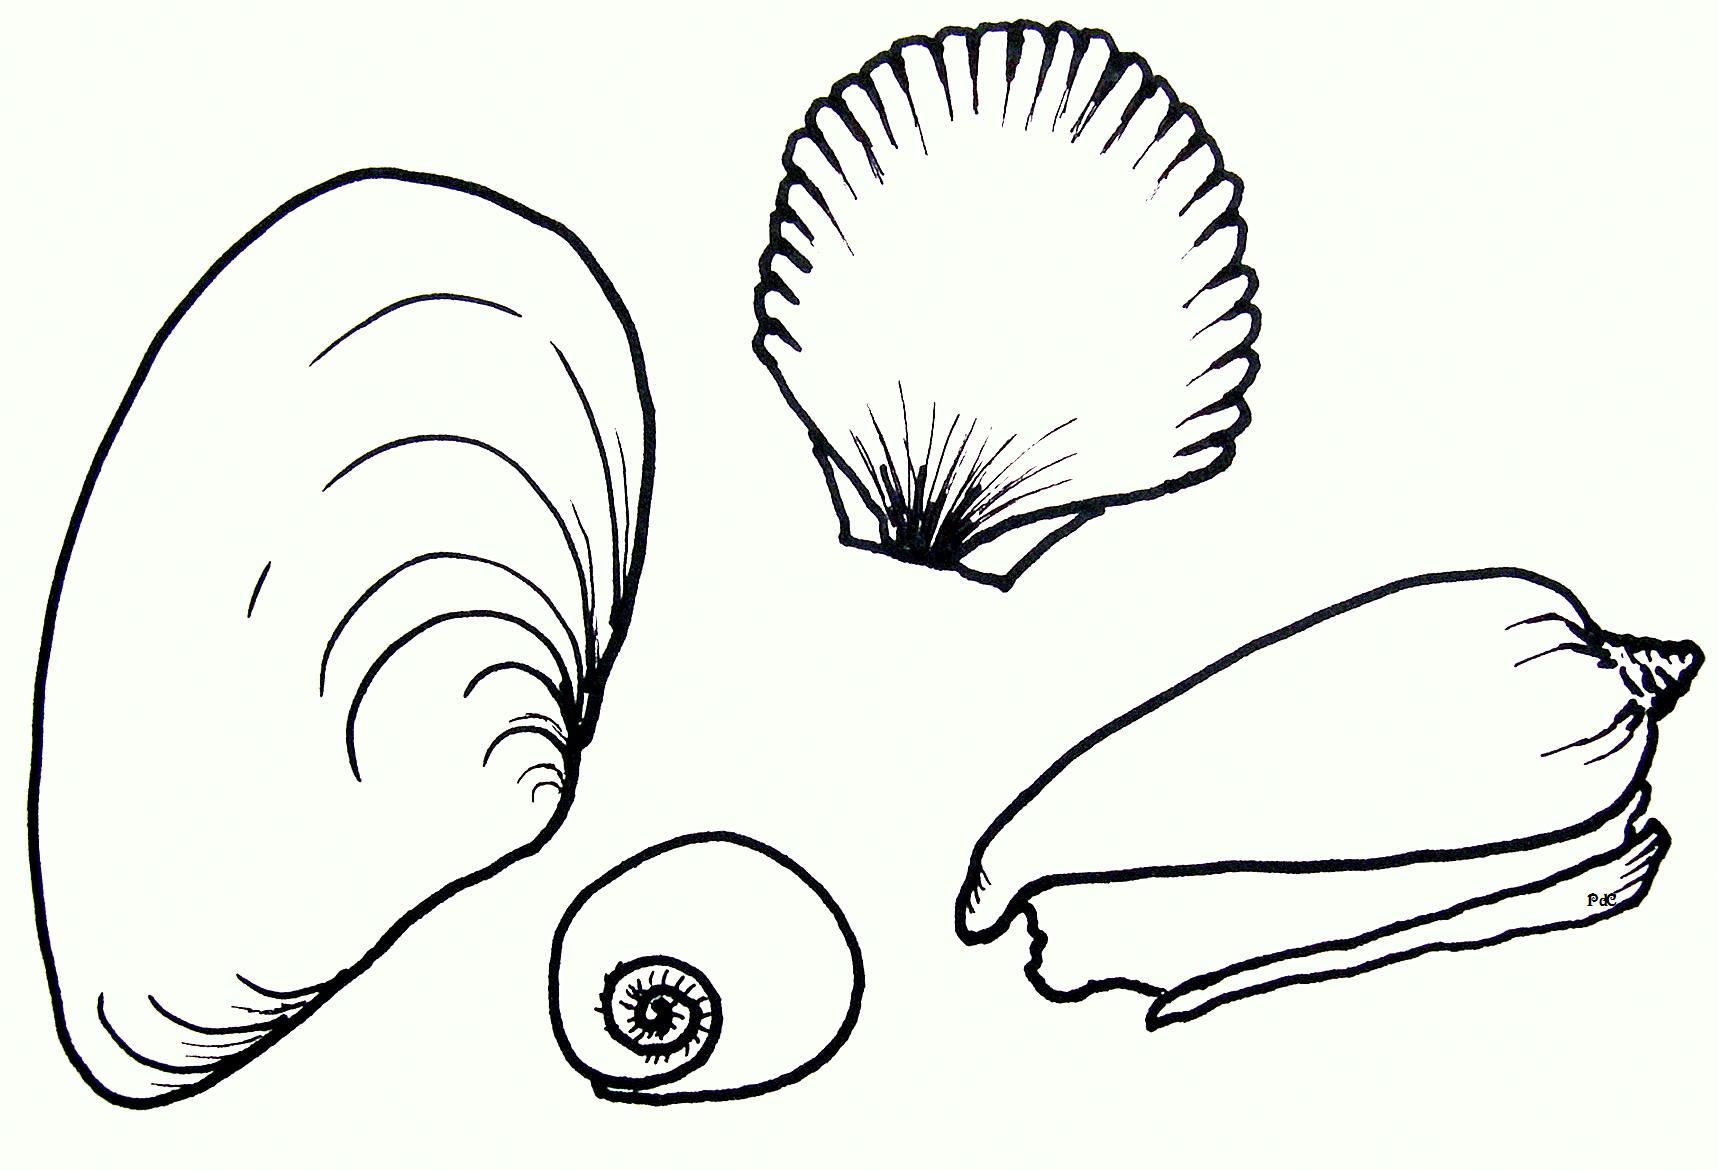 Seashell Drawing - ClipArt Best